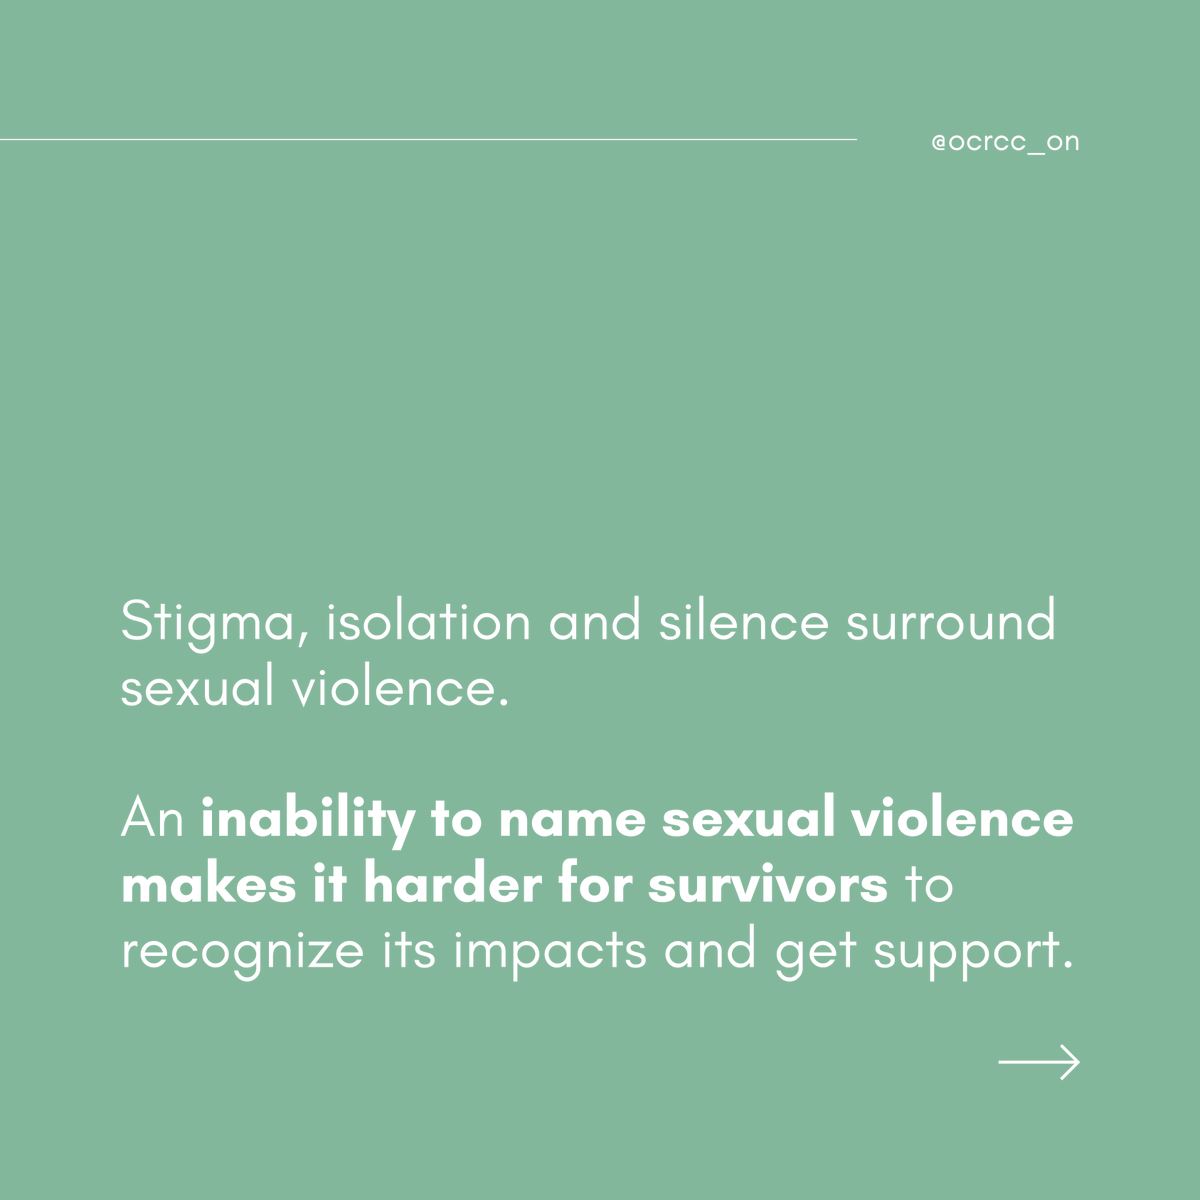 Many high-profile sexual violence cases have occurred over the last few years. Sexual violence must be a part of the National Action Plan to End Gender-Based Violence. 🔗 Read all our recommendations for Ontario’s next steps at: tinyurl.com/25mpcd8t